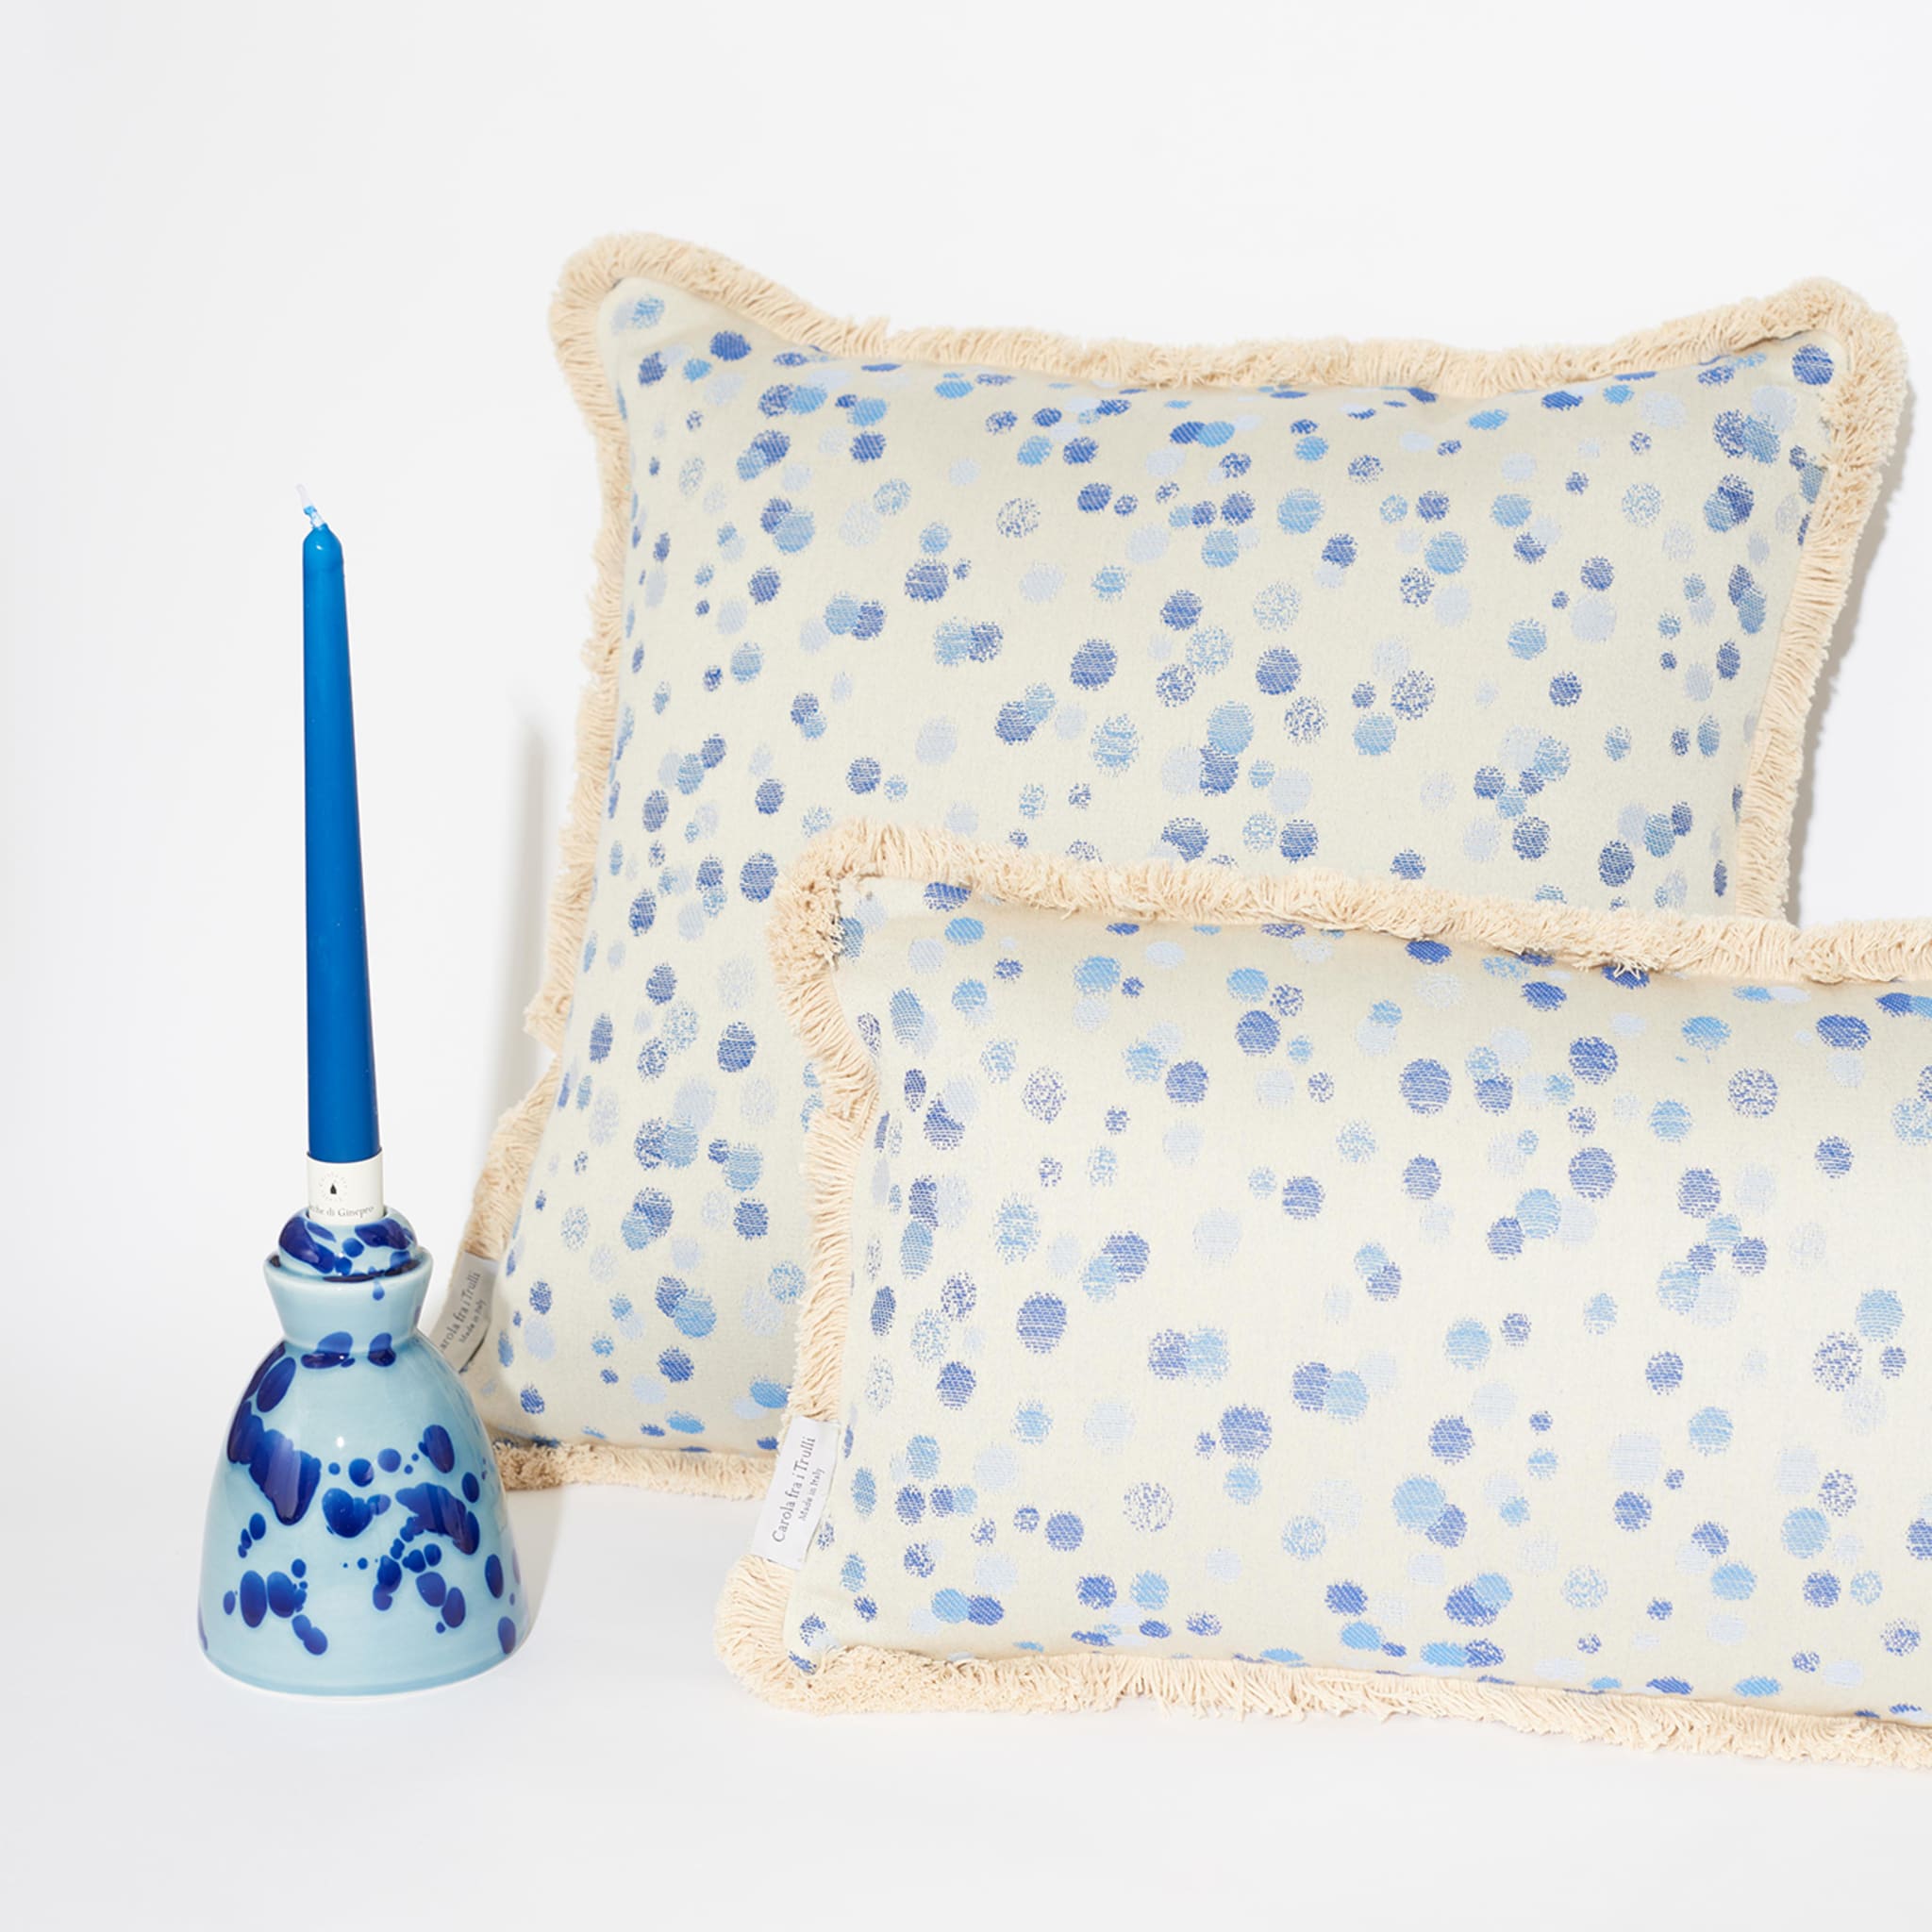 Small Celeste and Blue Fringed Cushion - Alternative view 1